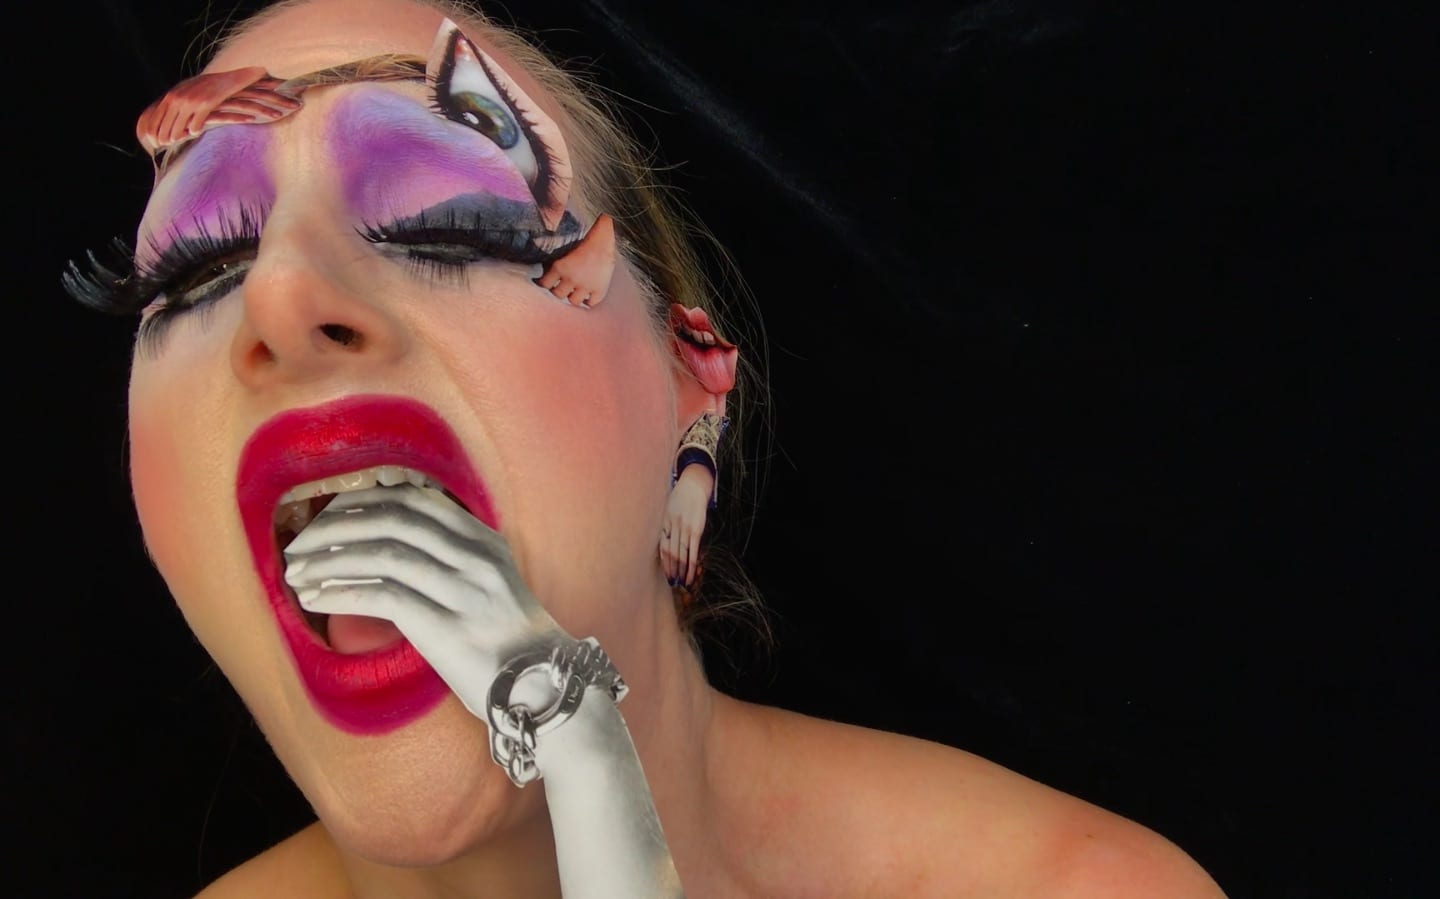 Color video still of performer Monique Jenkinson performing as her drag persona, Fauxnique. She wears heavy makeup, devouring an image of a hand wearing a large bracelet that appears to have been cut from a fashion magazine; magazine cutouts of other body parts are stuck to her forehead.